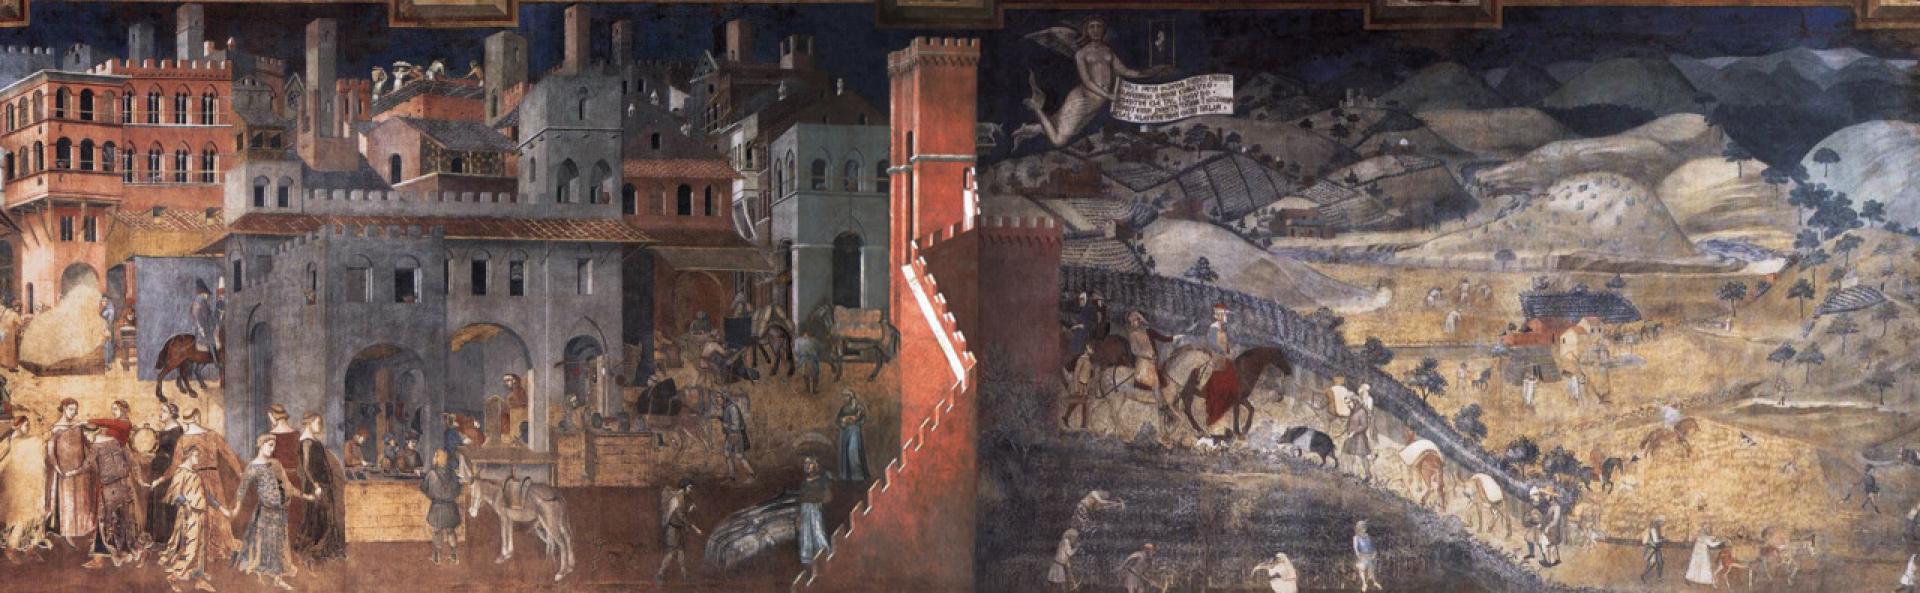 Ambrogio Lorenzetti’s Allegory of the Effects of Good Government: a rare example of the city and the country in harmony (1338). | Photo via Palazzo Pubblico, Siena. (Bridgeman Art Library)